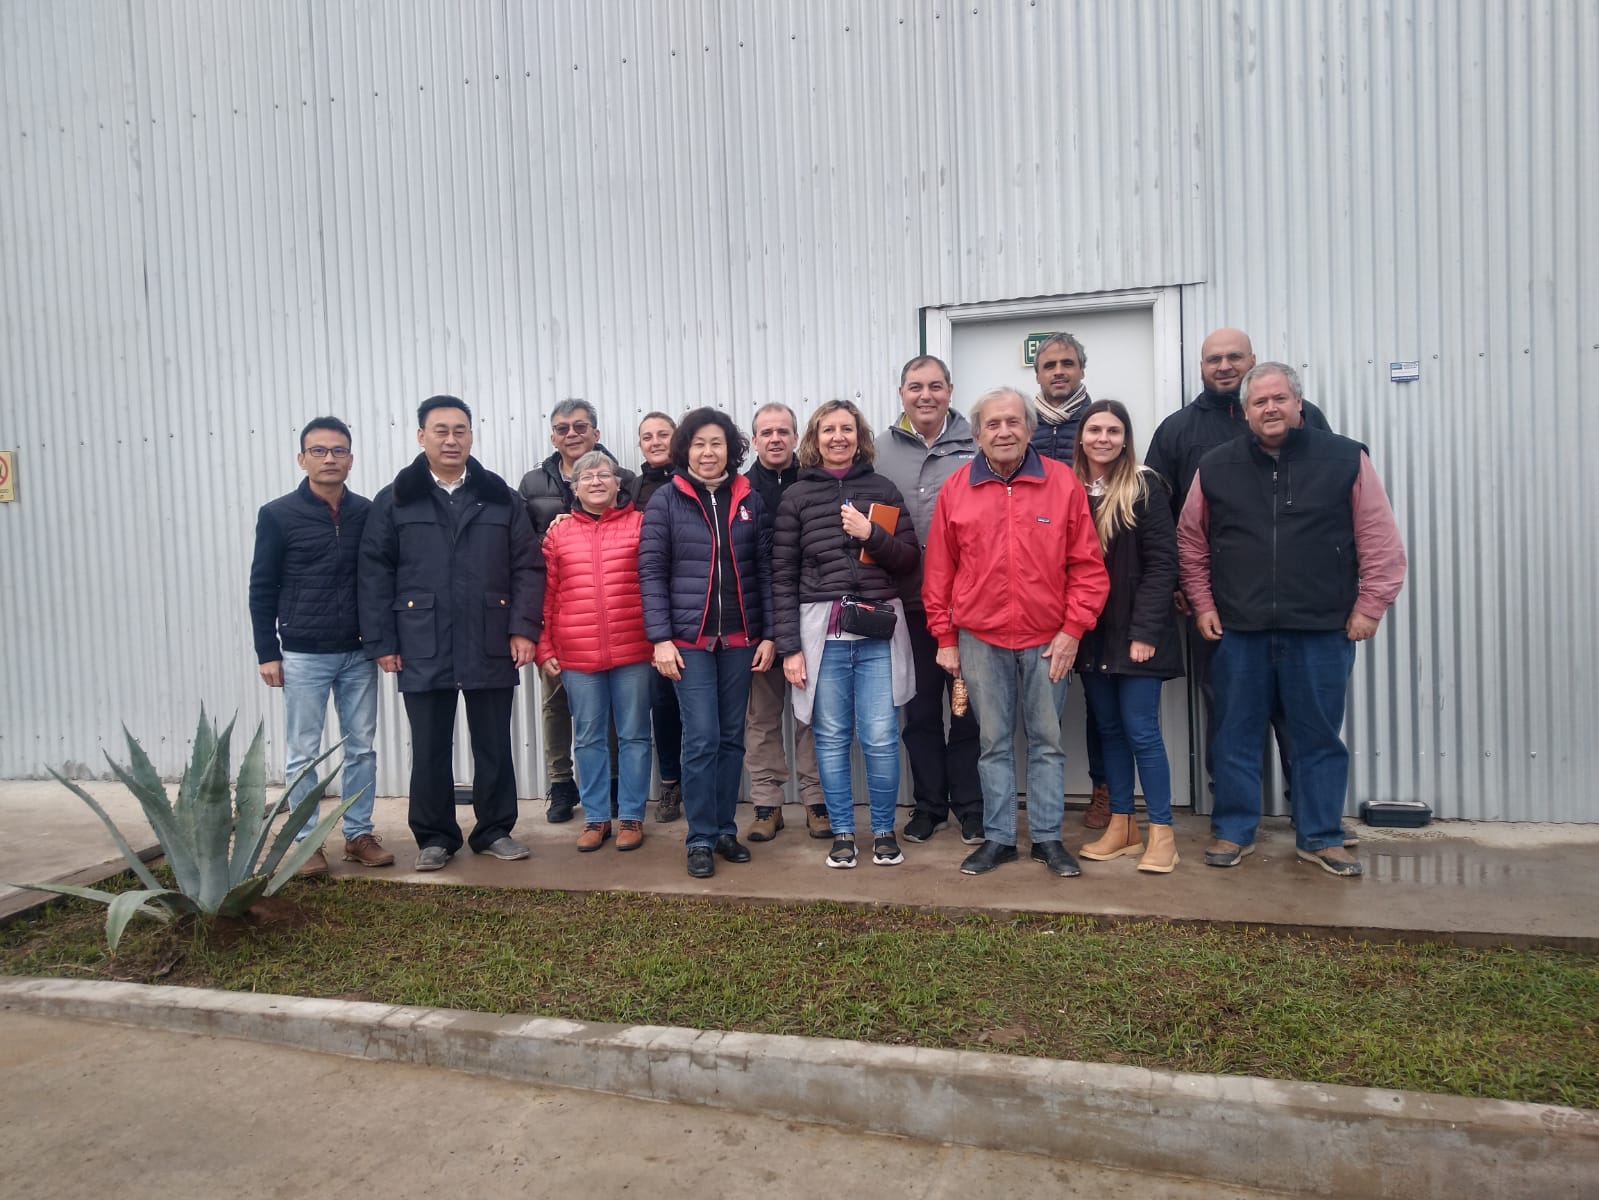 A group of representatives from China gather for a group photo outside of a pecan processing facility in Argentina.